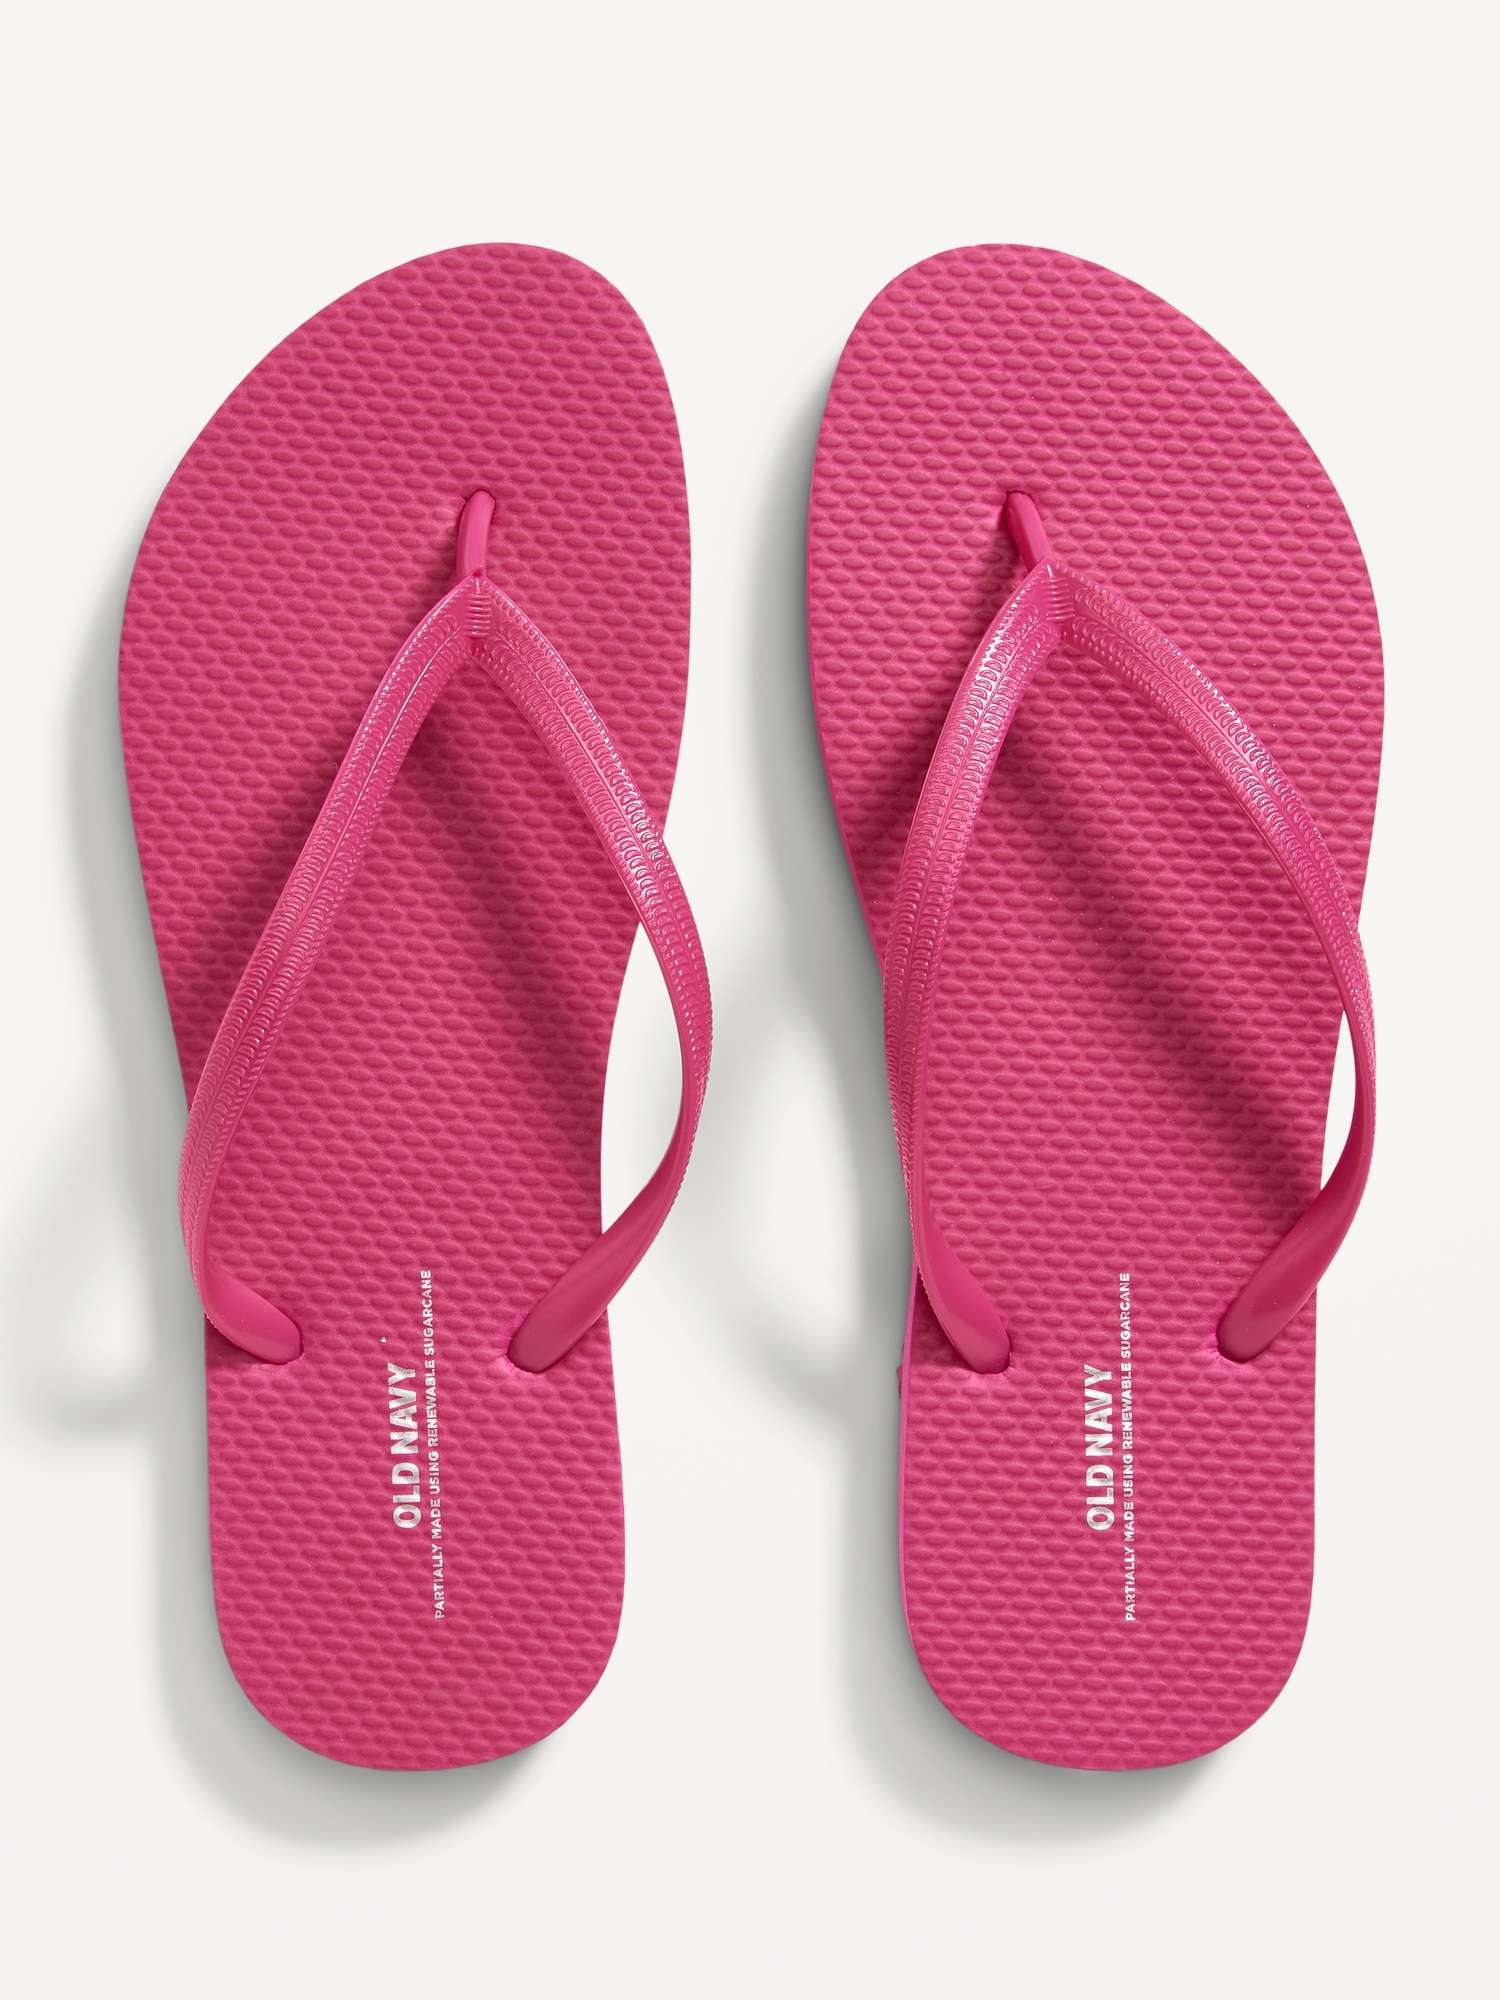 Old Navy S Flip Flop S B Wear Vs S New With Tag US 0.99